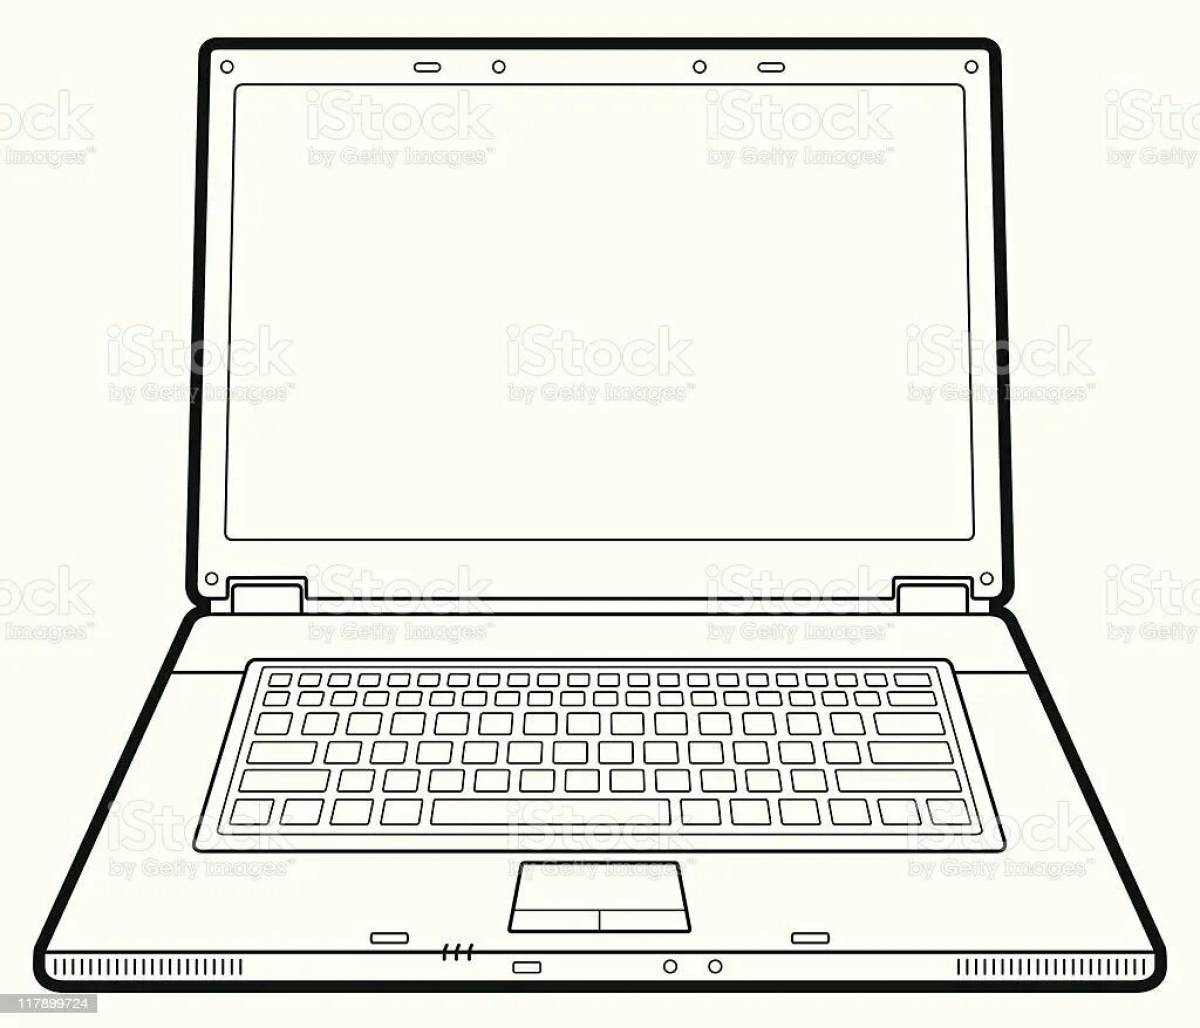 Attractive computer and phone coloring book